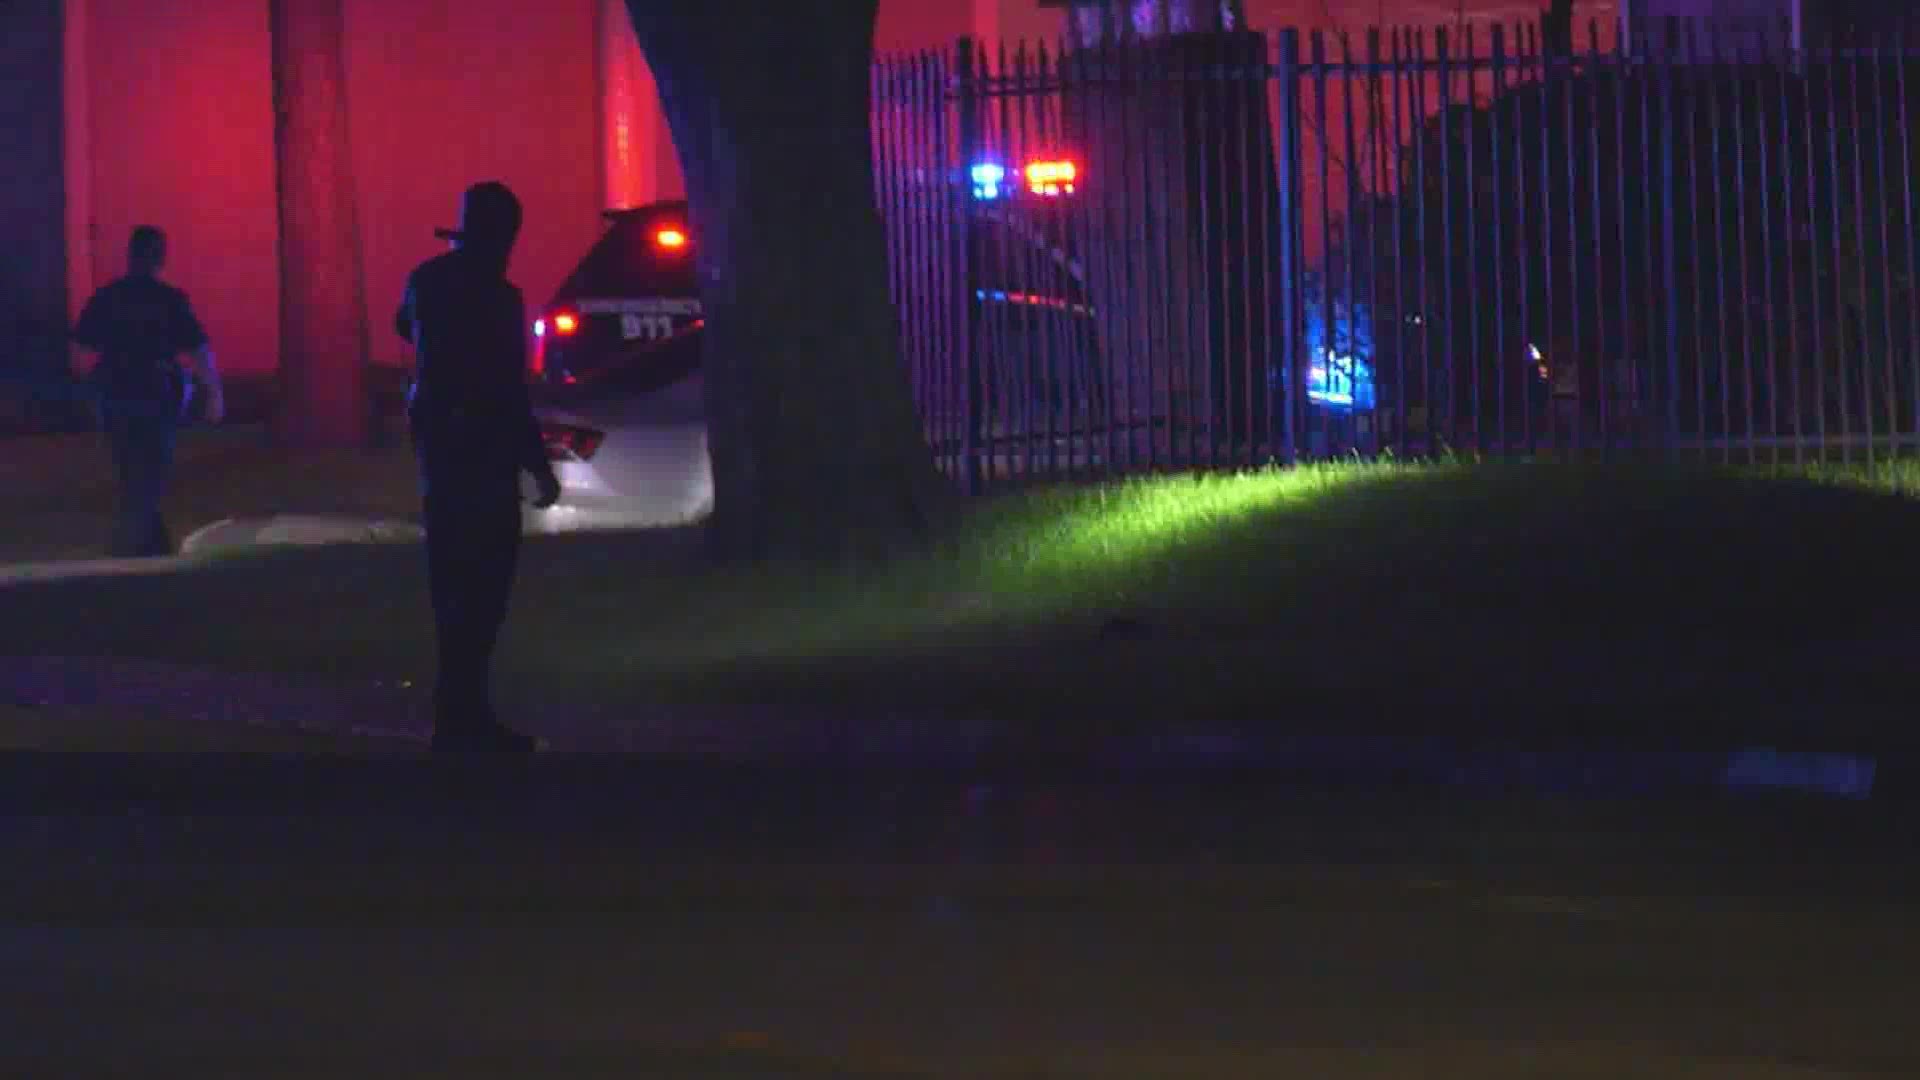 Two teenagers were shot early Sunday morning in an apparent drive-by shooting in southwest Houston.